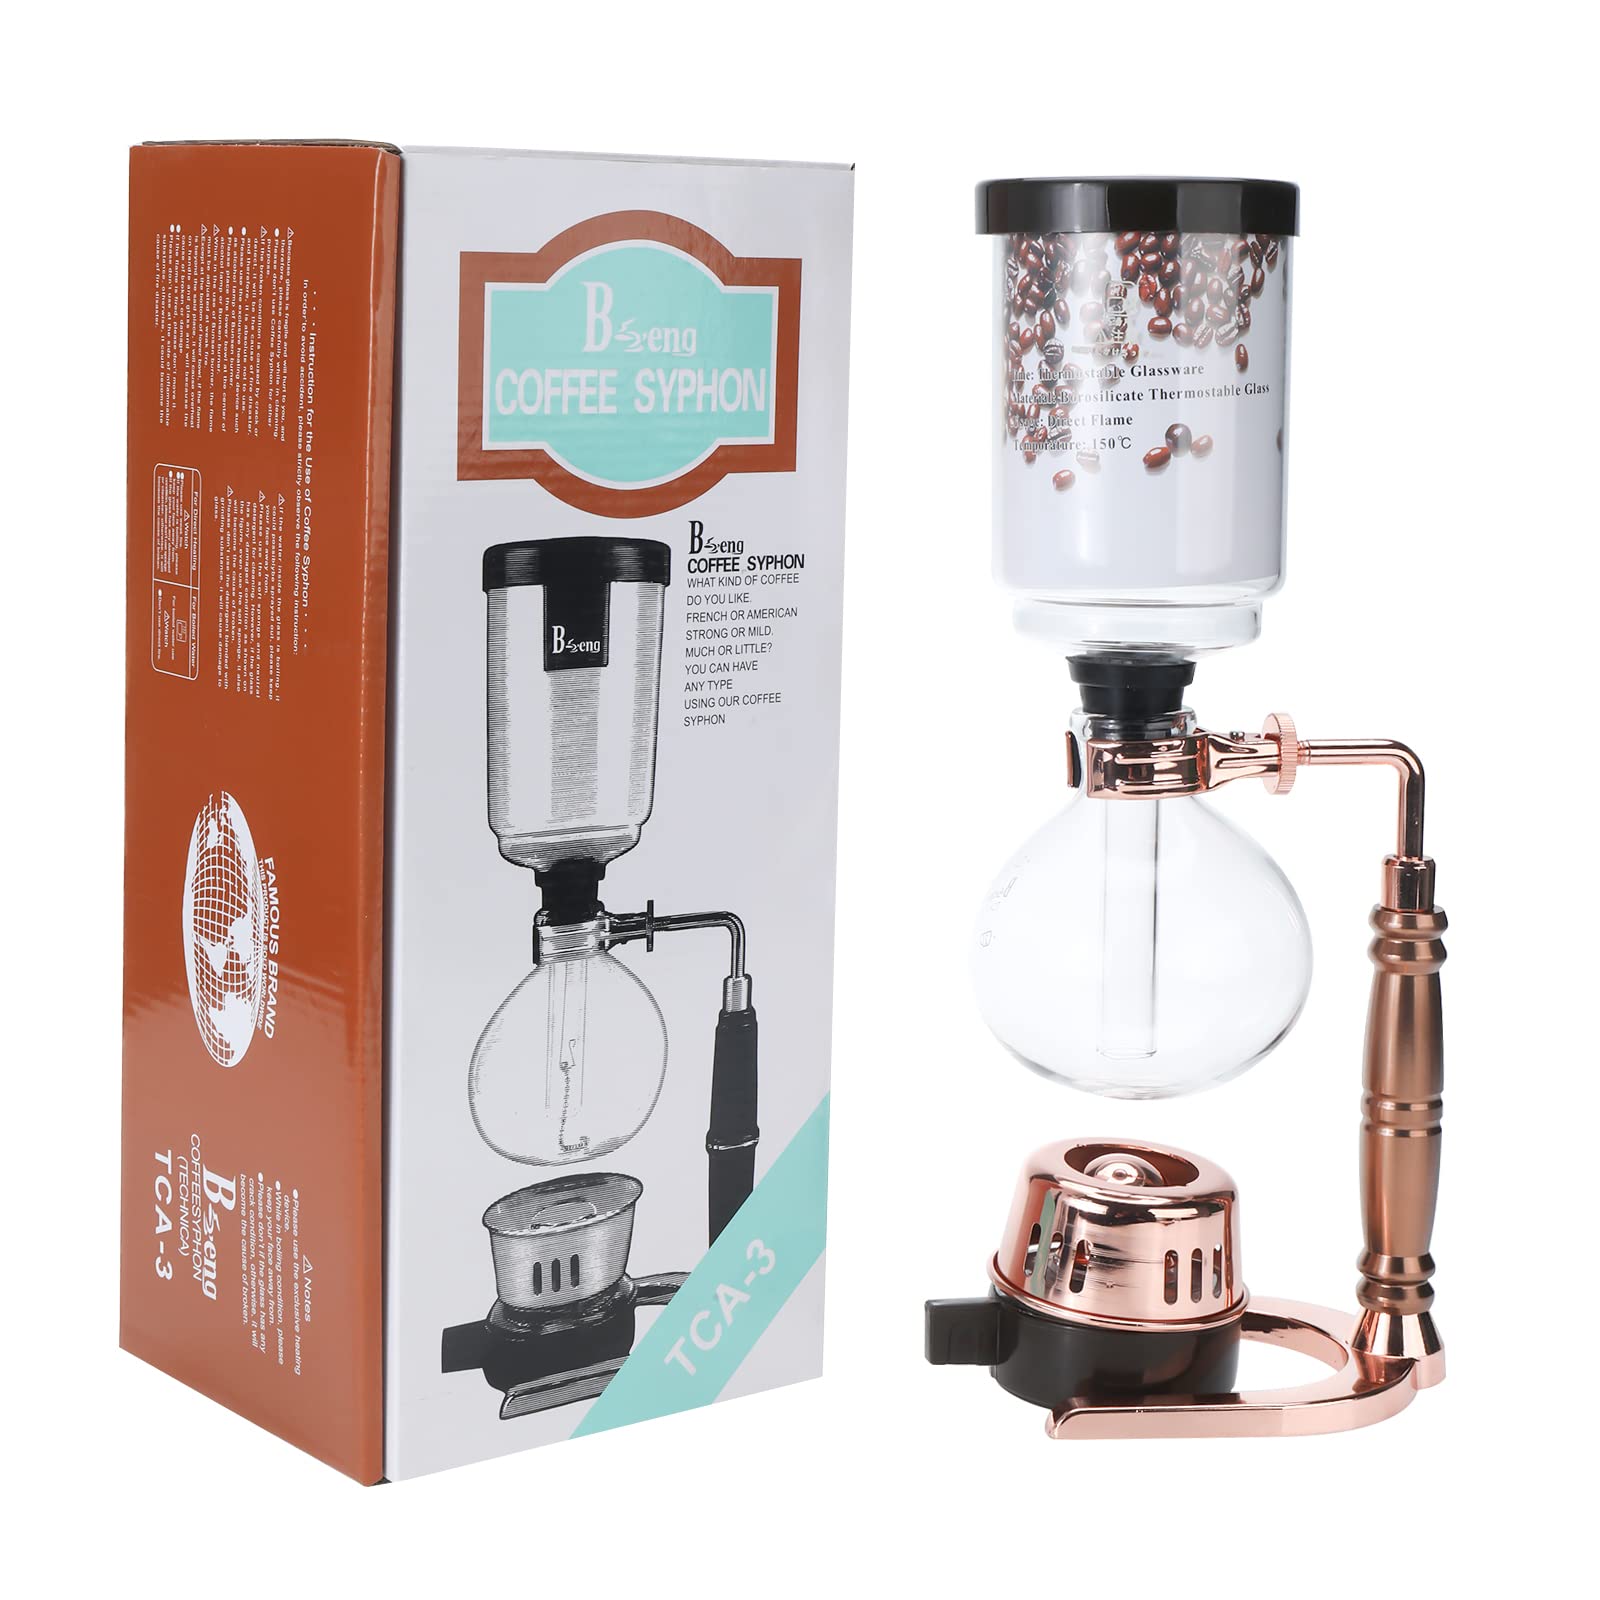 Amarine Made 5-Cup Coffee Syphon Tabletop Siphon (Syphon) Coffee Maker Gift Box Wrap for Christmas,birthday,Thanks Giving Day-Gift for Mother,Father,Friends (BT-3R)